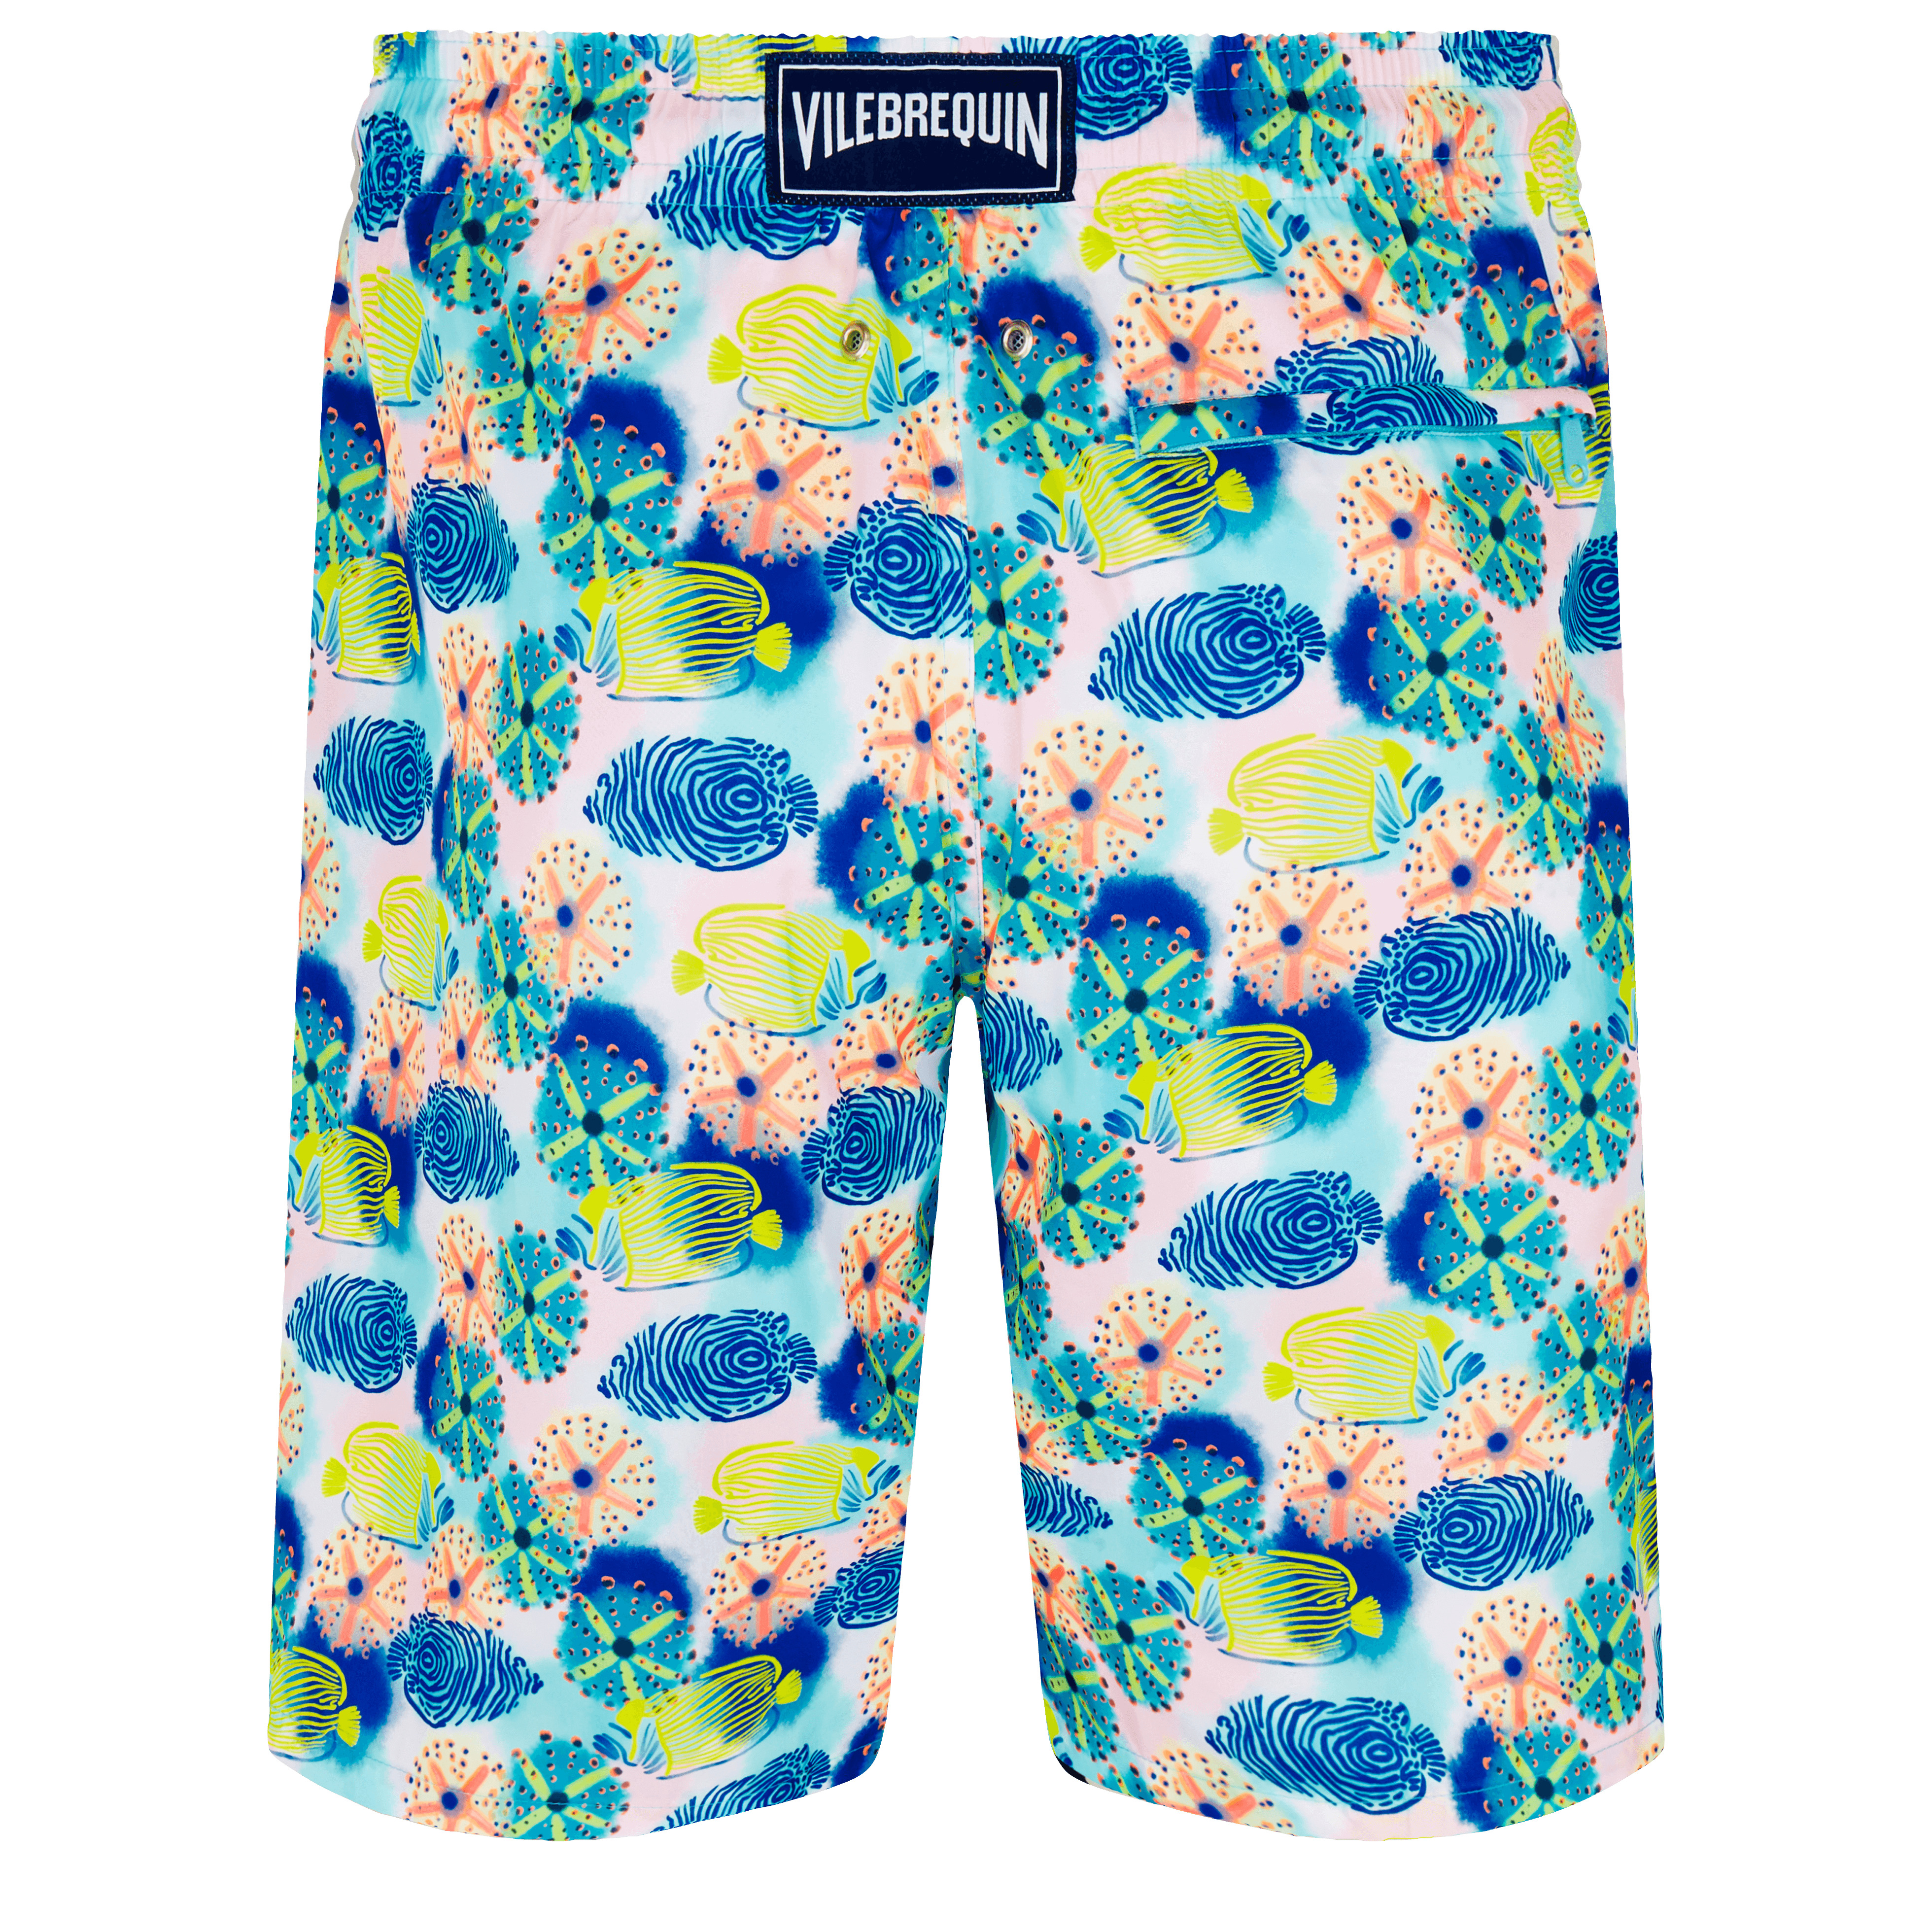 Men Swim Trunks Long Ultra-light and packable Urchins & Fishes - 2